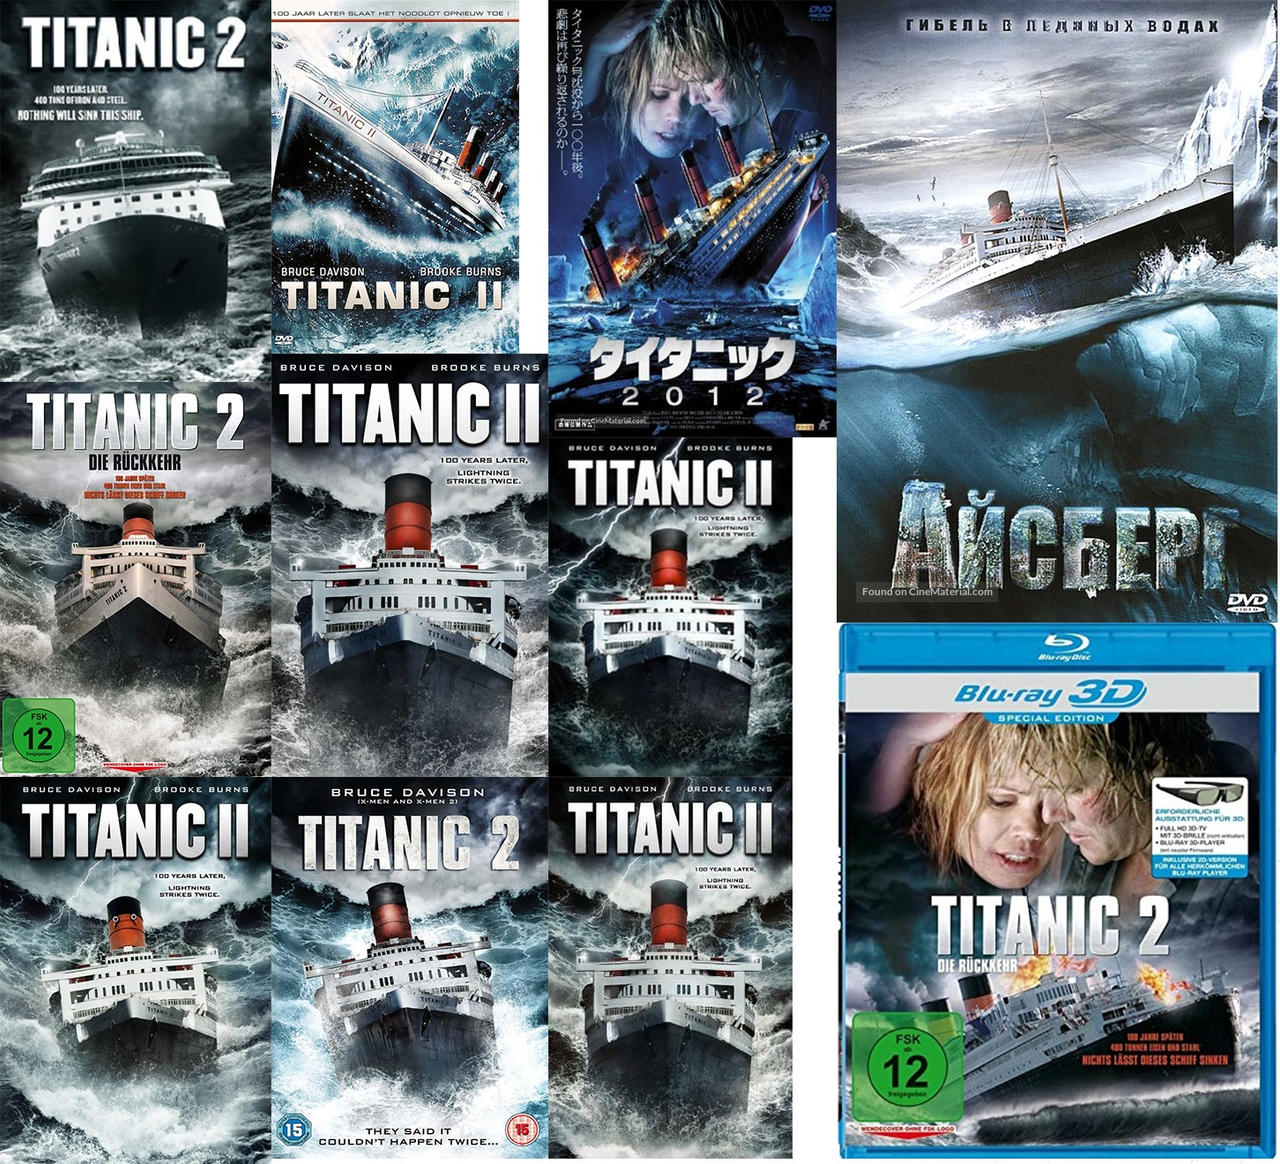 Titanic II covers. by G011d3nPony10 on DeviantArt